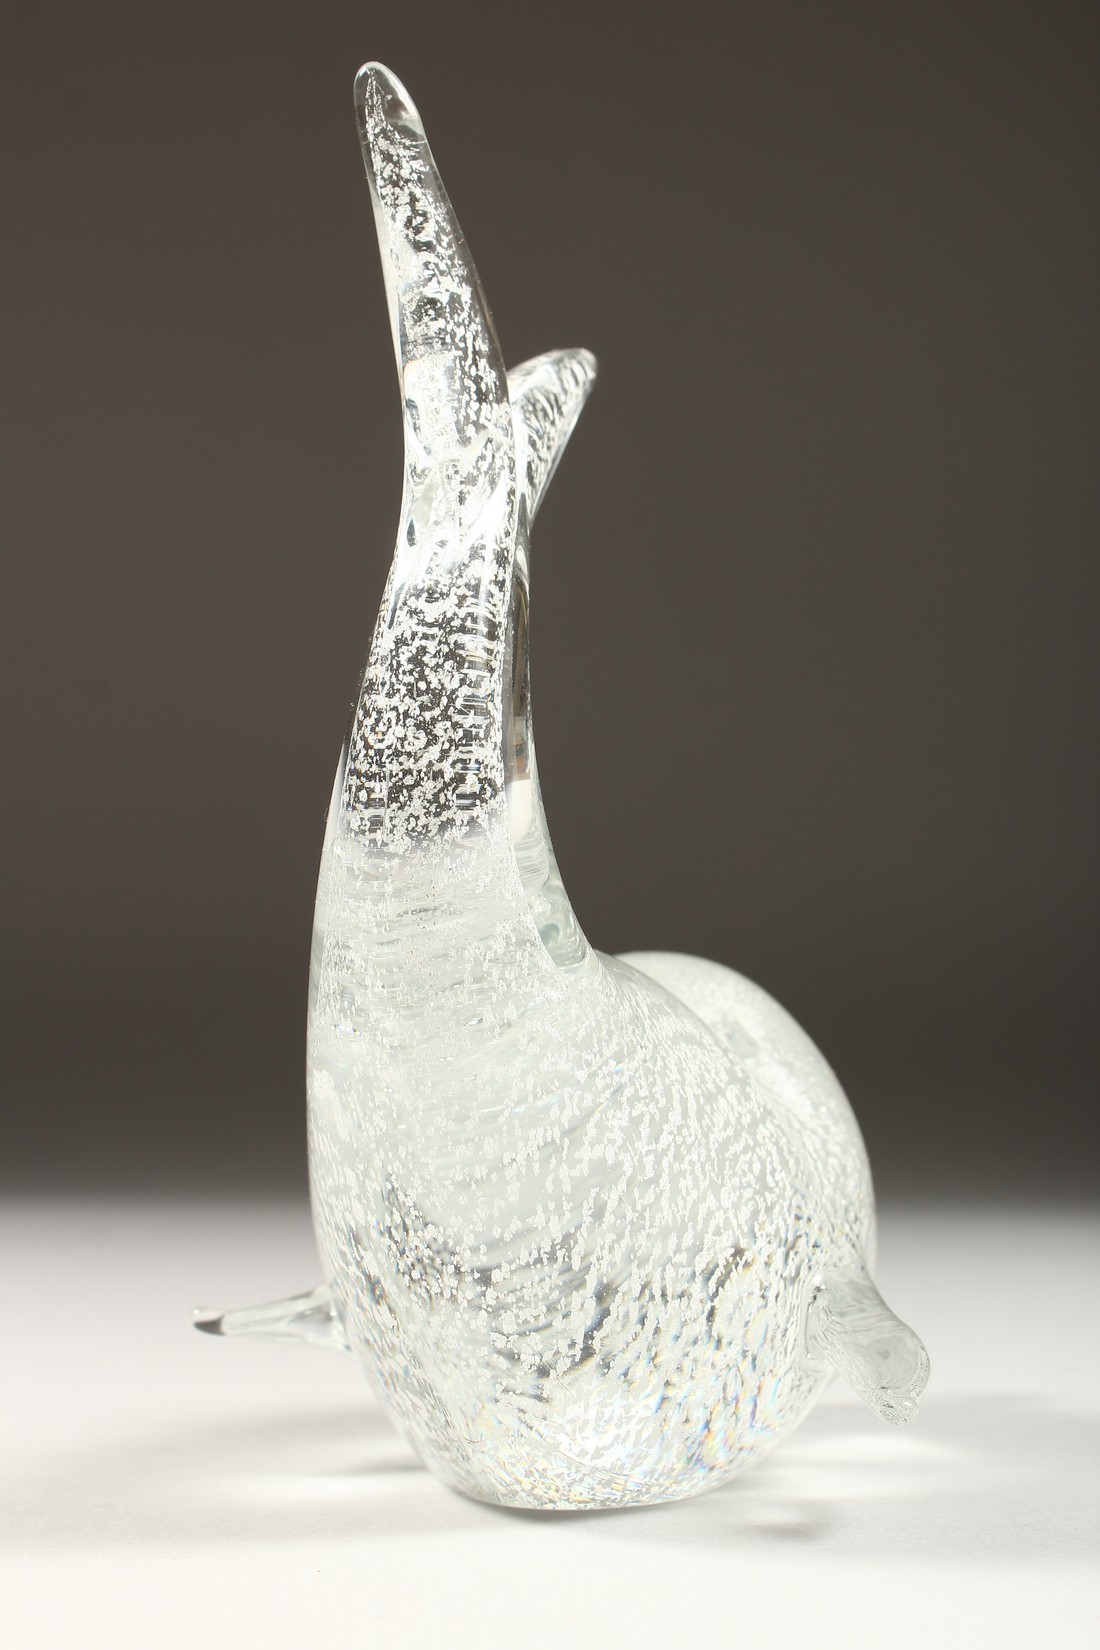 A SPECKLED GLASS DOLPHIN 6ins high. - Image 5 of 6